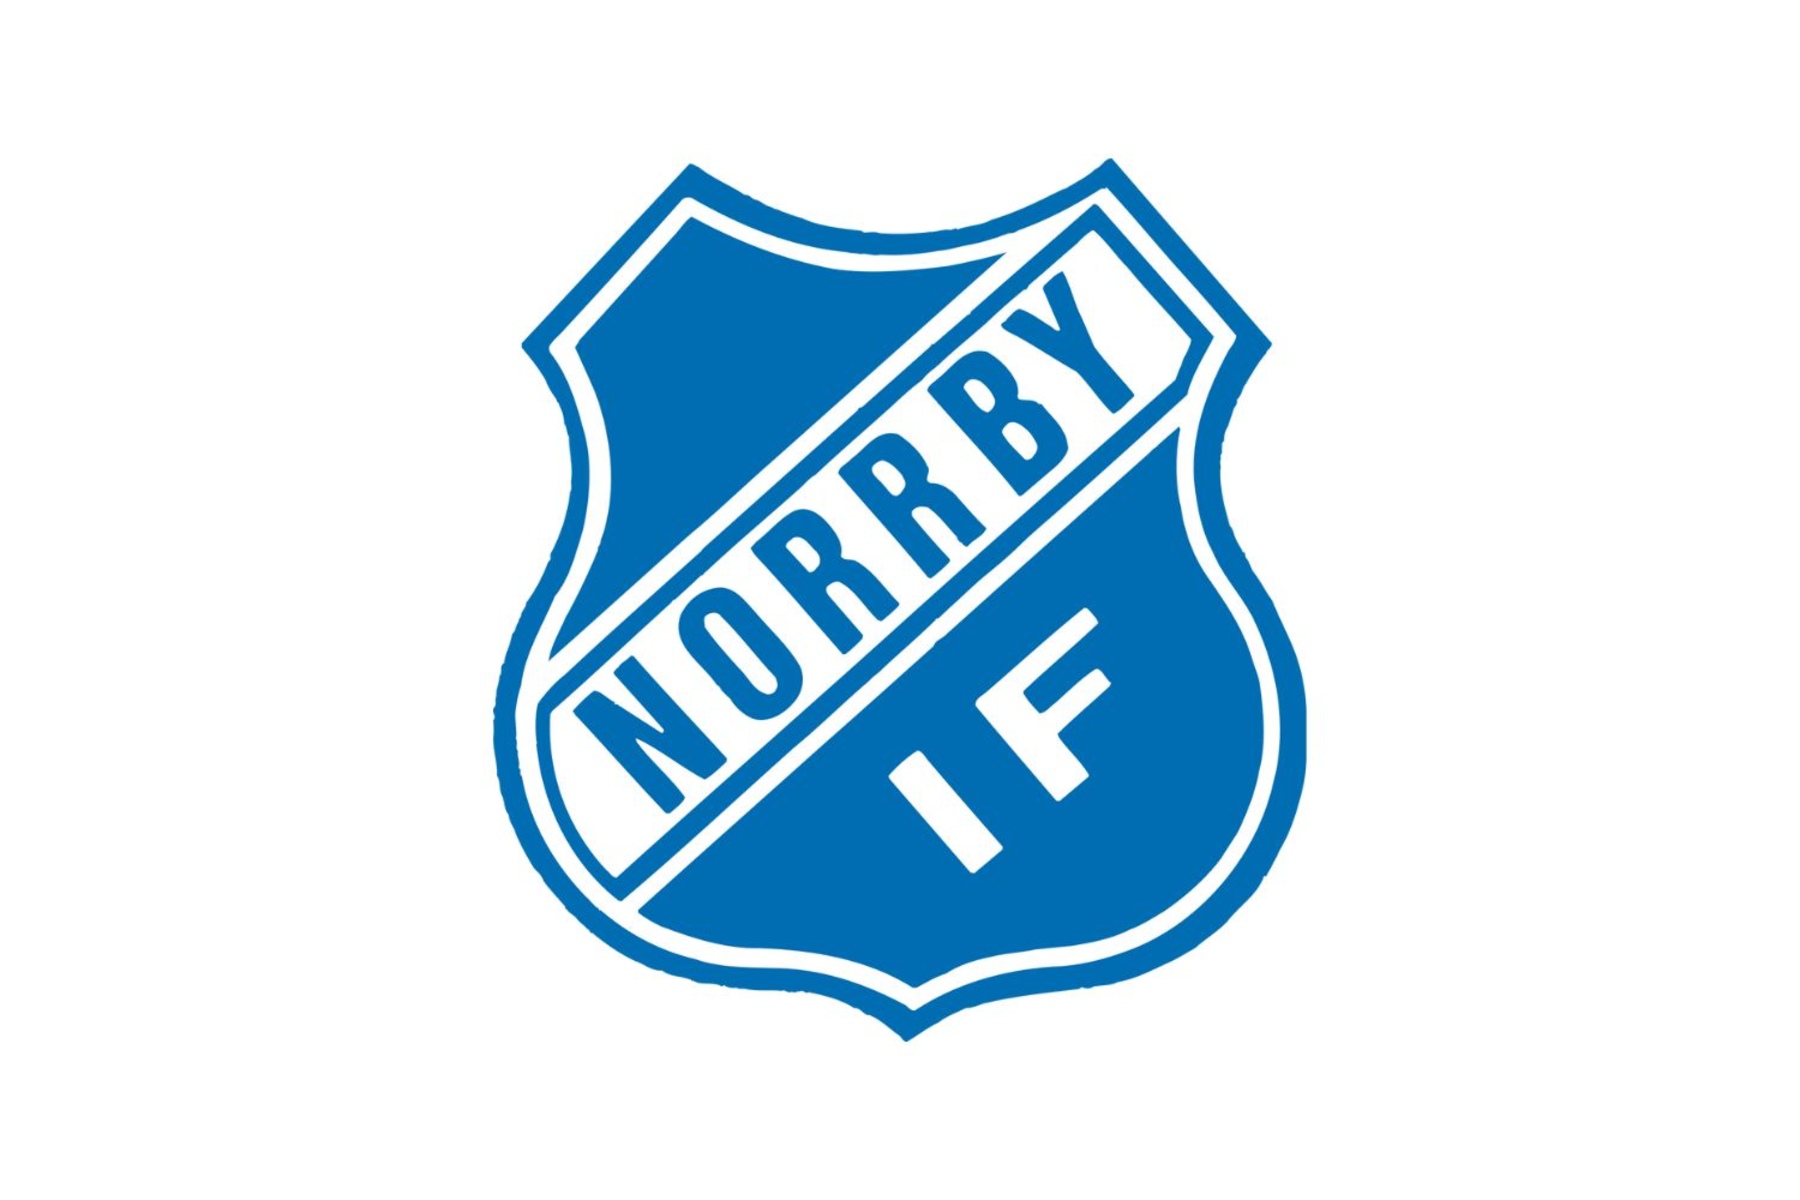 norrby-if-21-football-club-facts